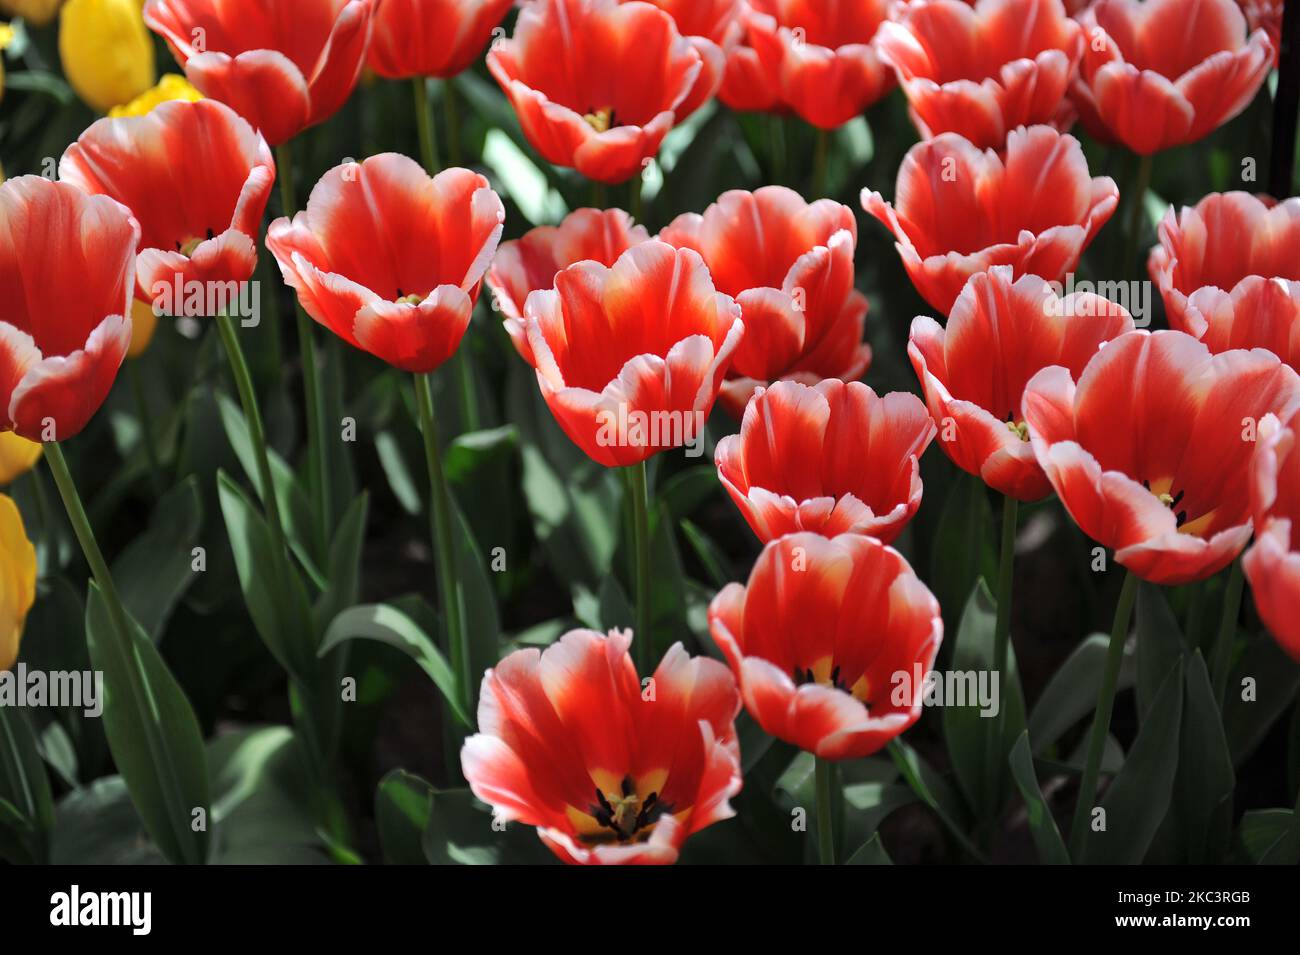 Red with white edges Triumph tulips (Tulipa) Talent bloom in a garden in April Stock Photo